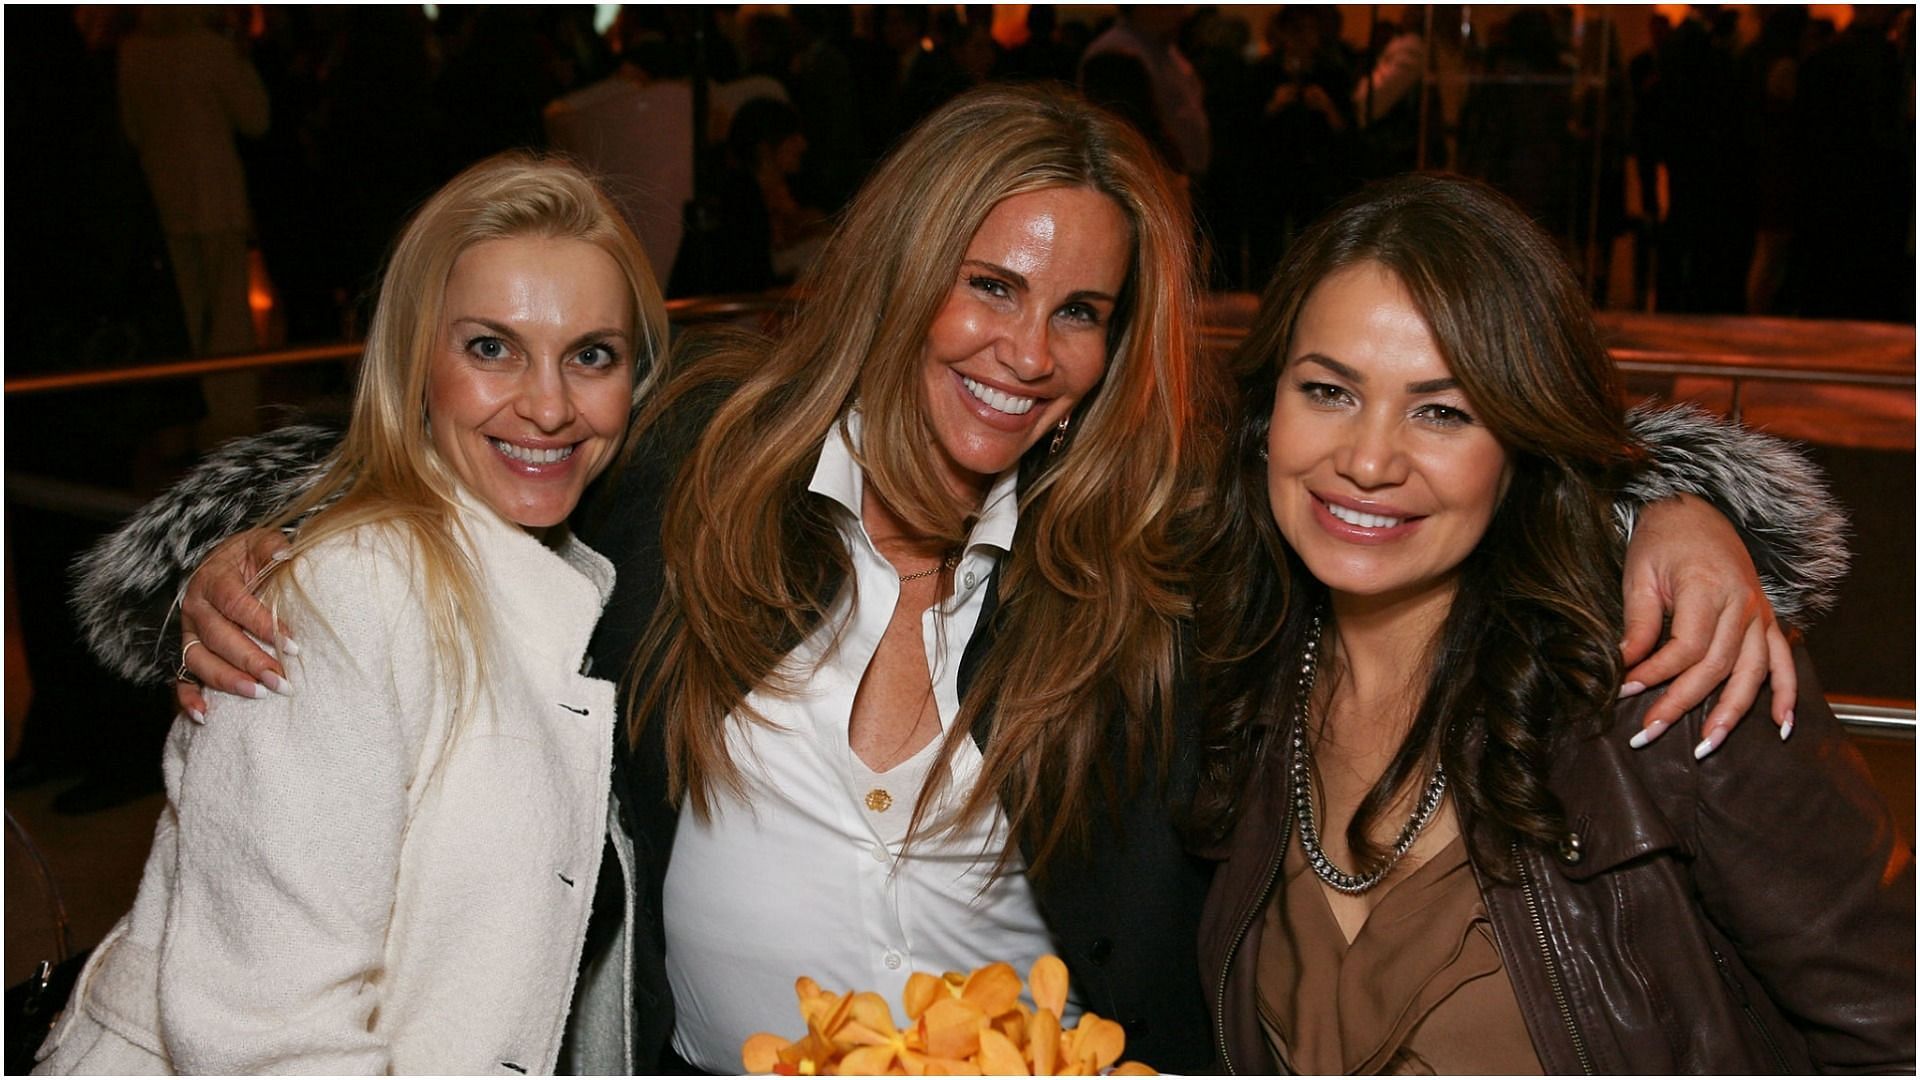 Parvina Glidewell, Tawny Kitaen, and Kristina Steiner at the Orange County Performing Arts Center on January 12, 2011 (Image via Getty Images)